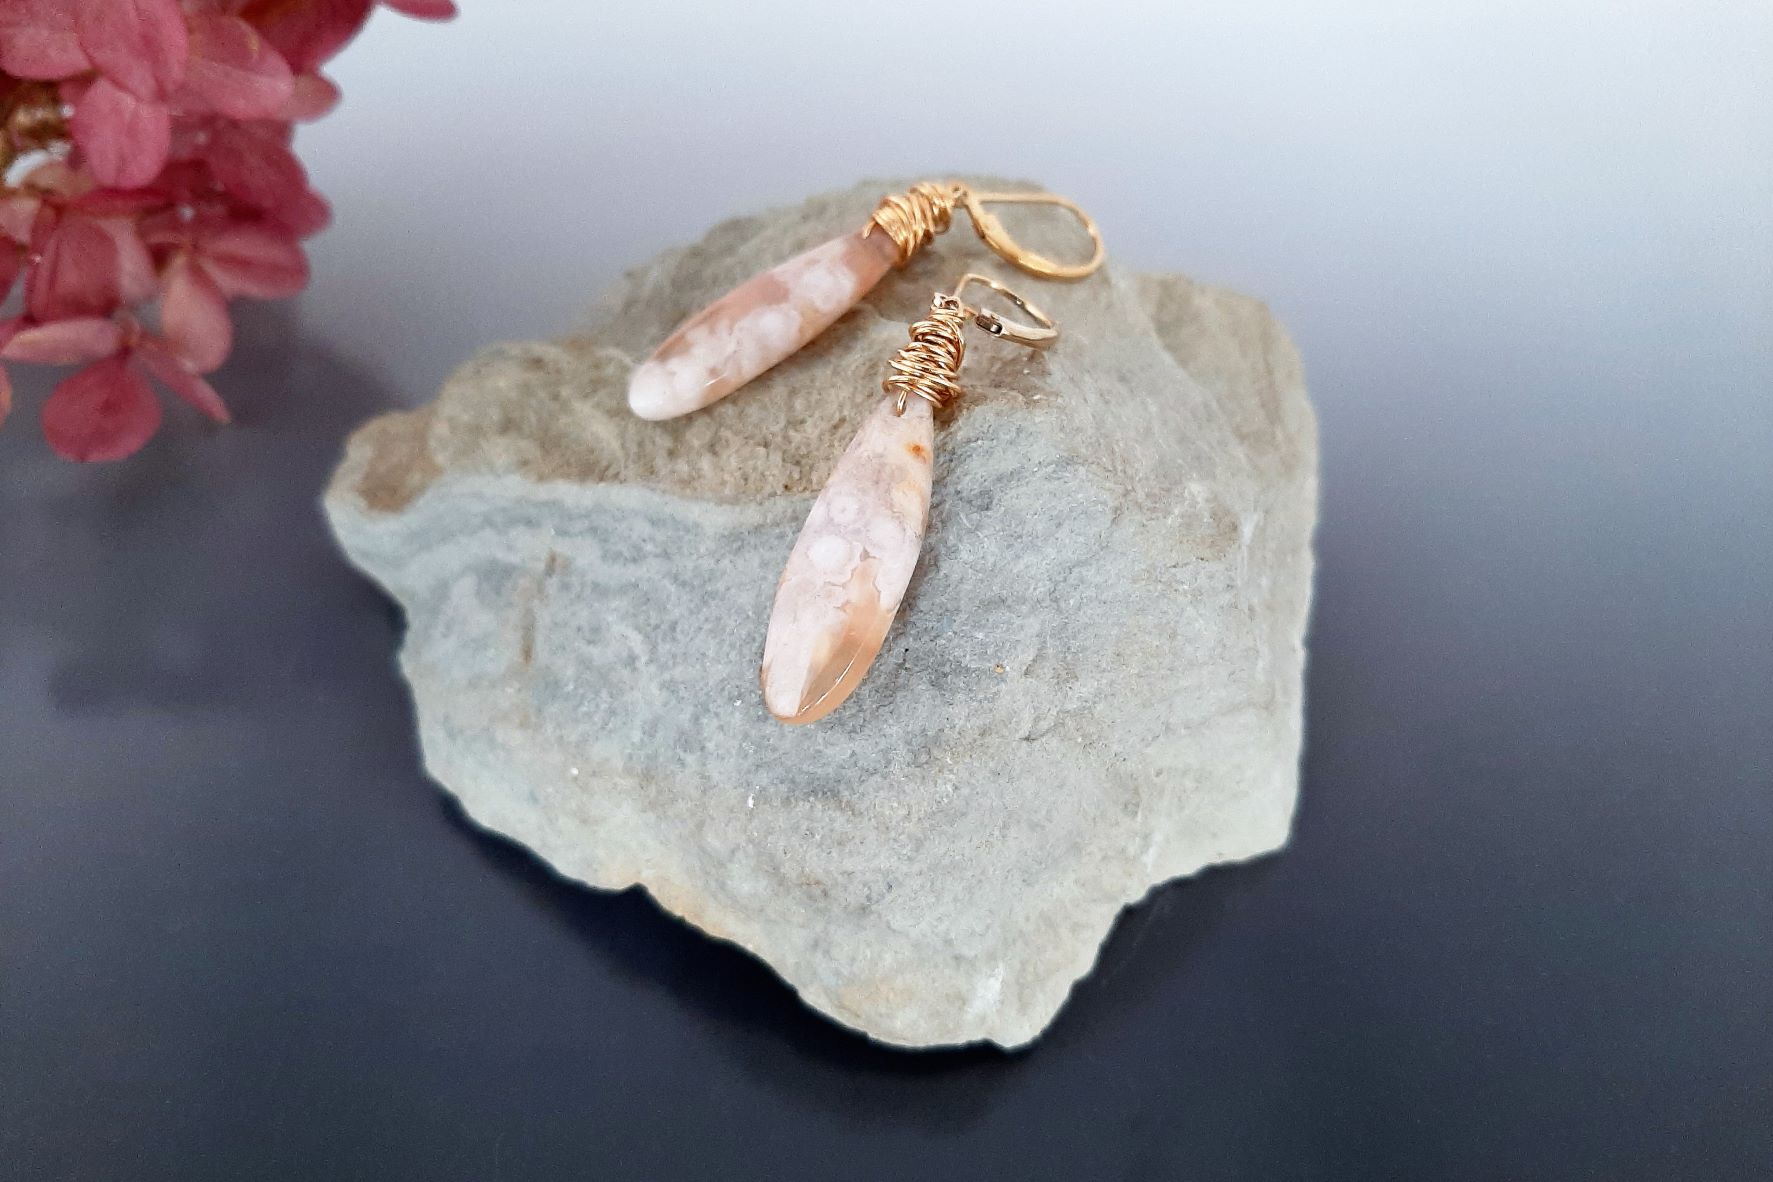 Cherry blossom agate matched pair gemstone & gold filled earrings.